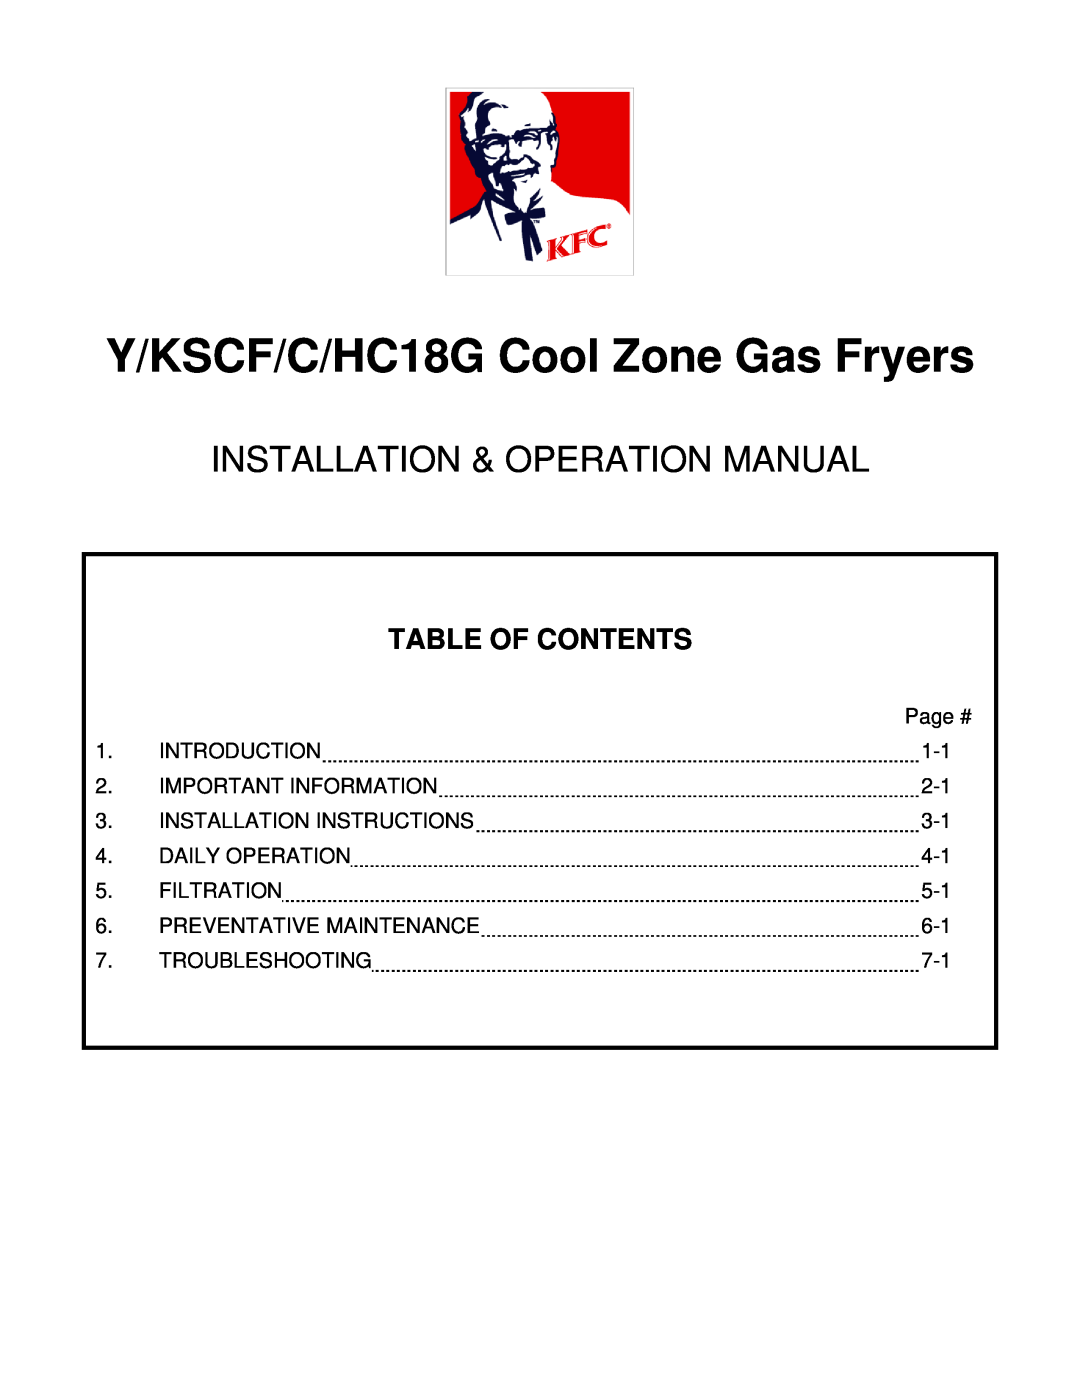 Frymaster operation manual Table Of Contents, Y/KSCF/C/HC18G Cool Zone Gas Fryers 